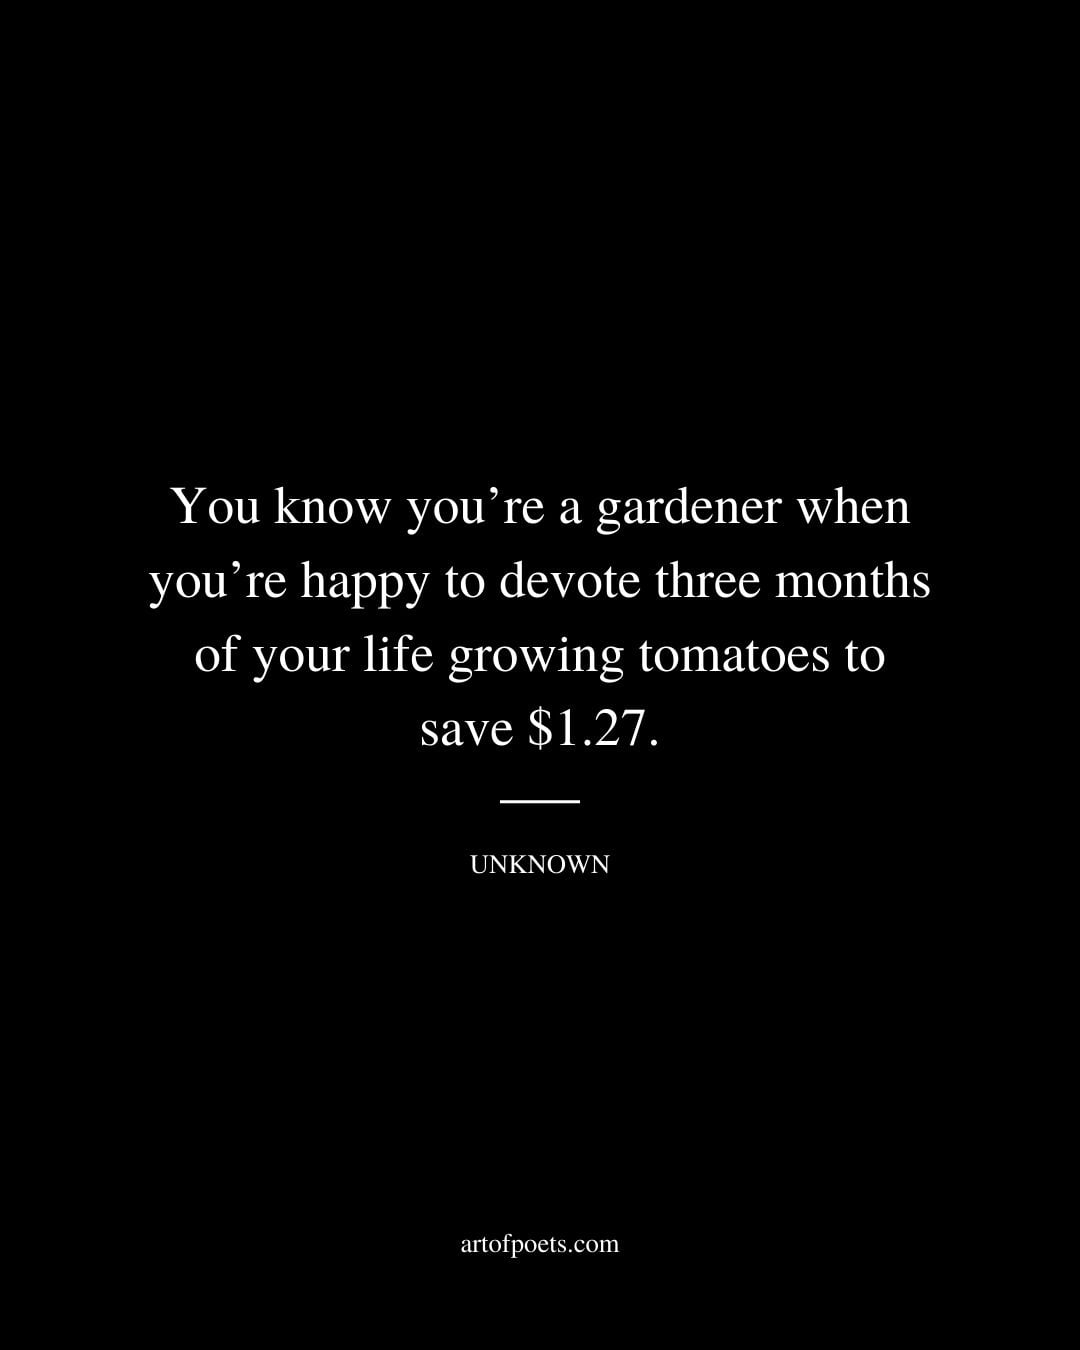 You know youre a gardener when youre happy to devote three months of your life growing tomatoes to save 1.27. Unknown